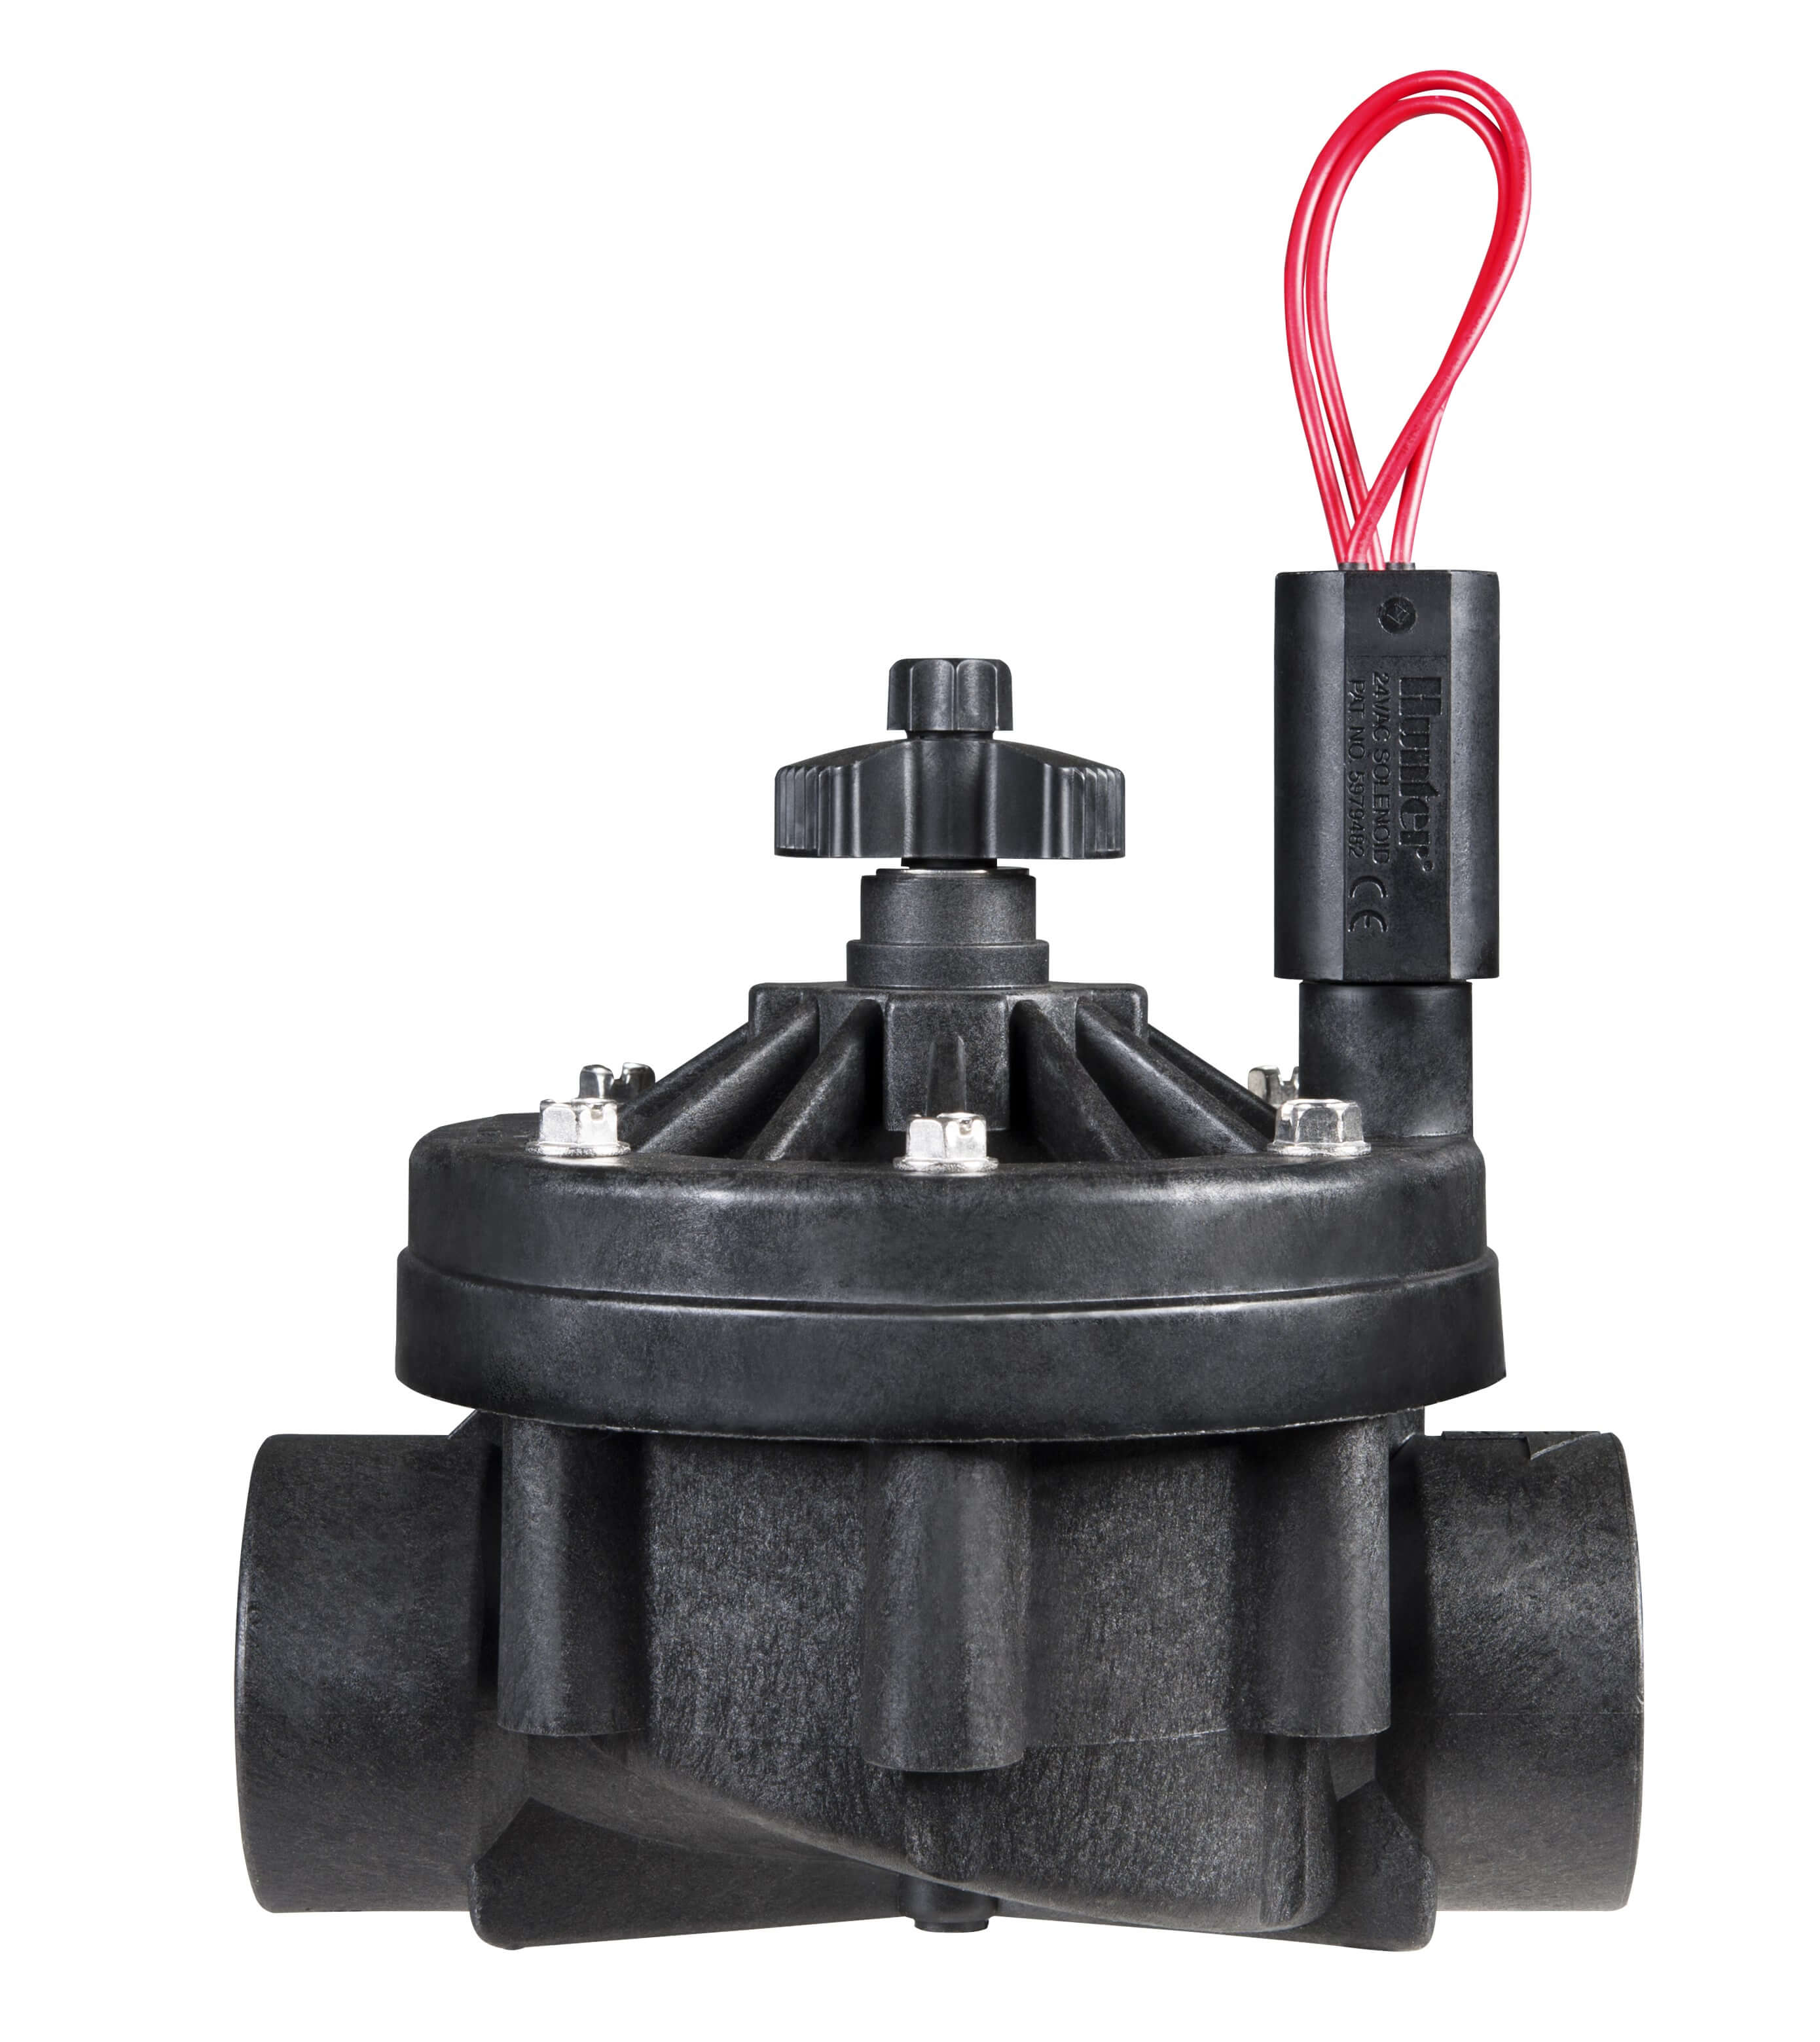 Hunter Solenoid valve glass-filled nylon 1" female thread 15bar 24VAC type 101-GB with flow control